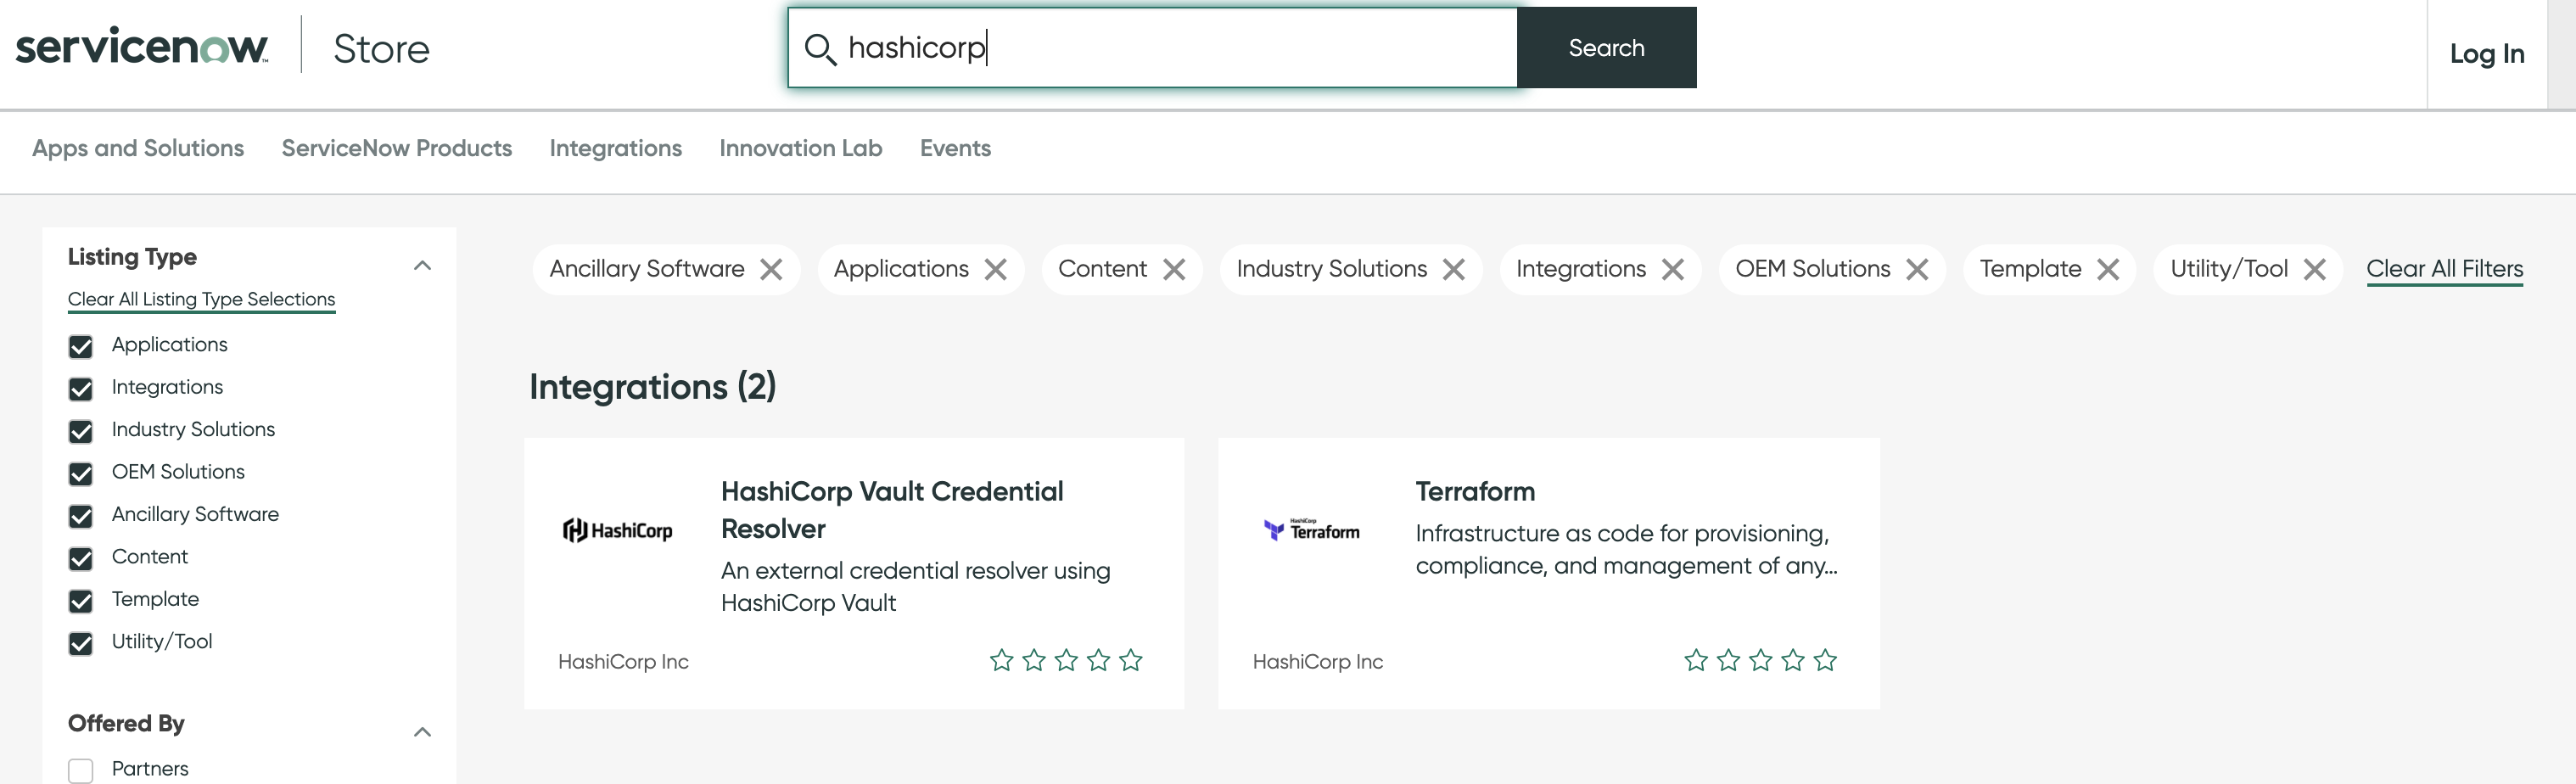 HashiCorp integrations in the ServiceNow store